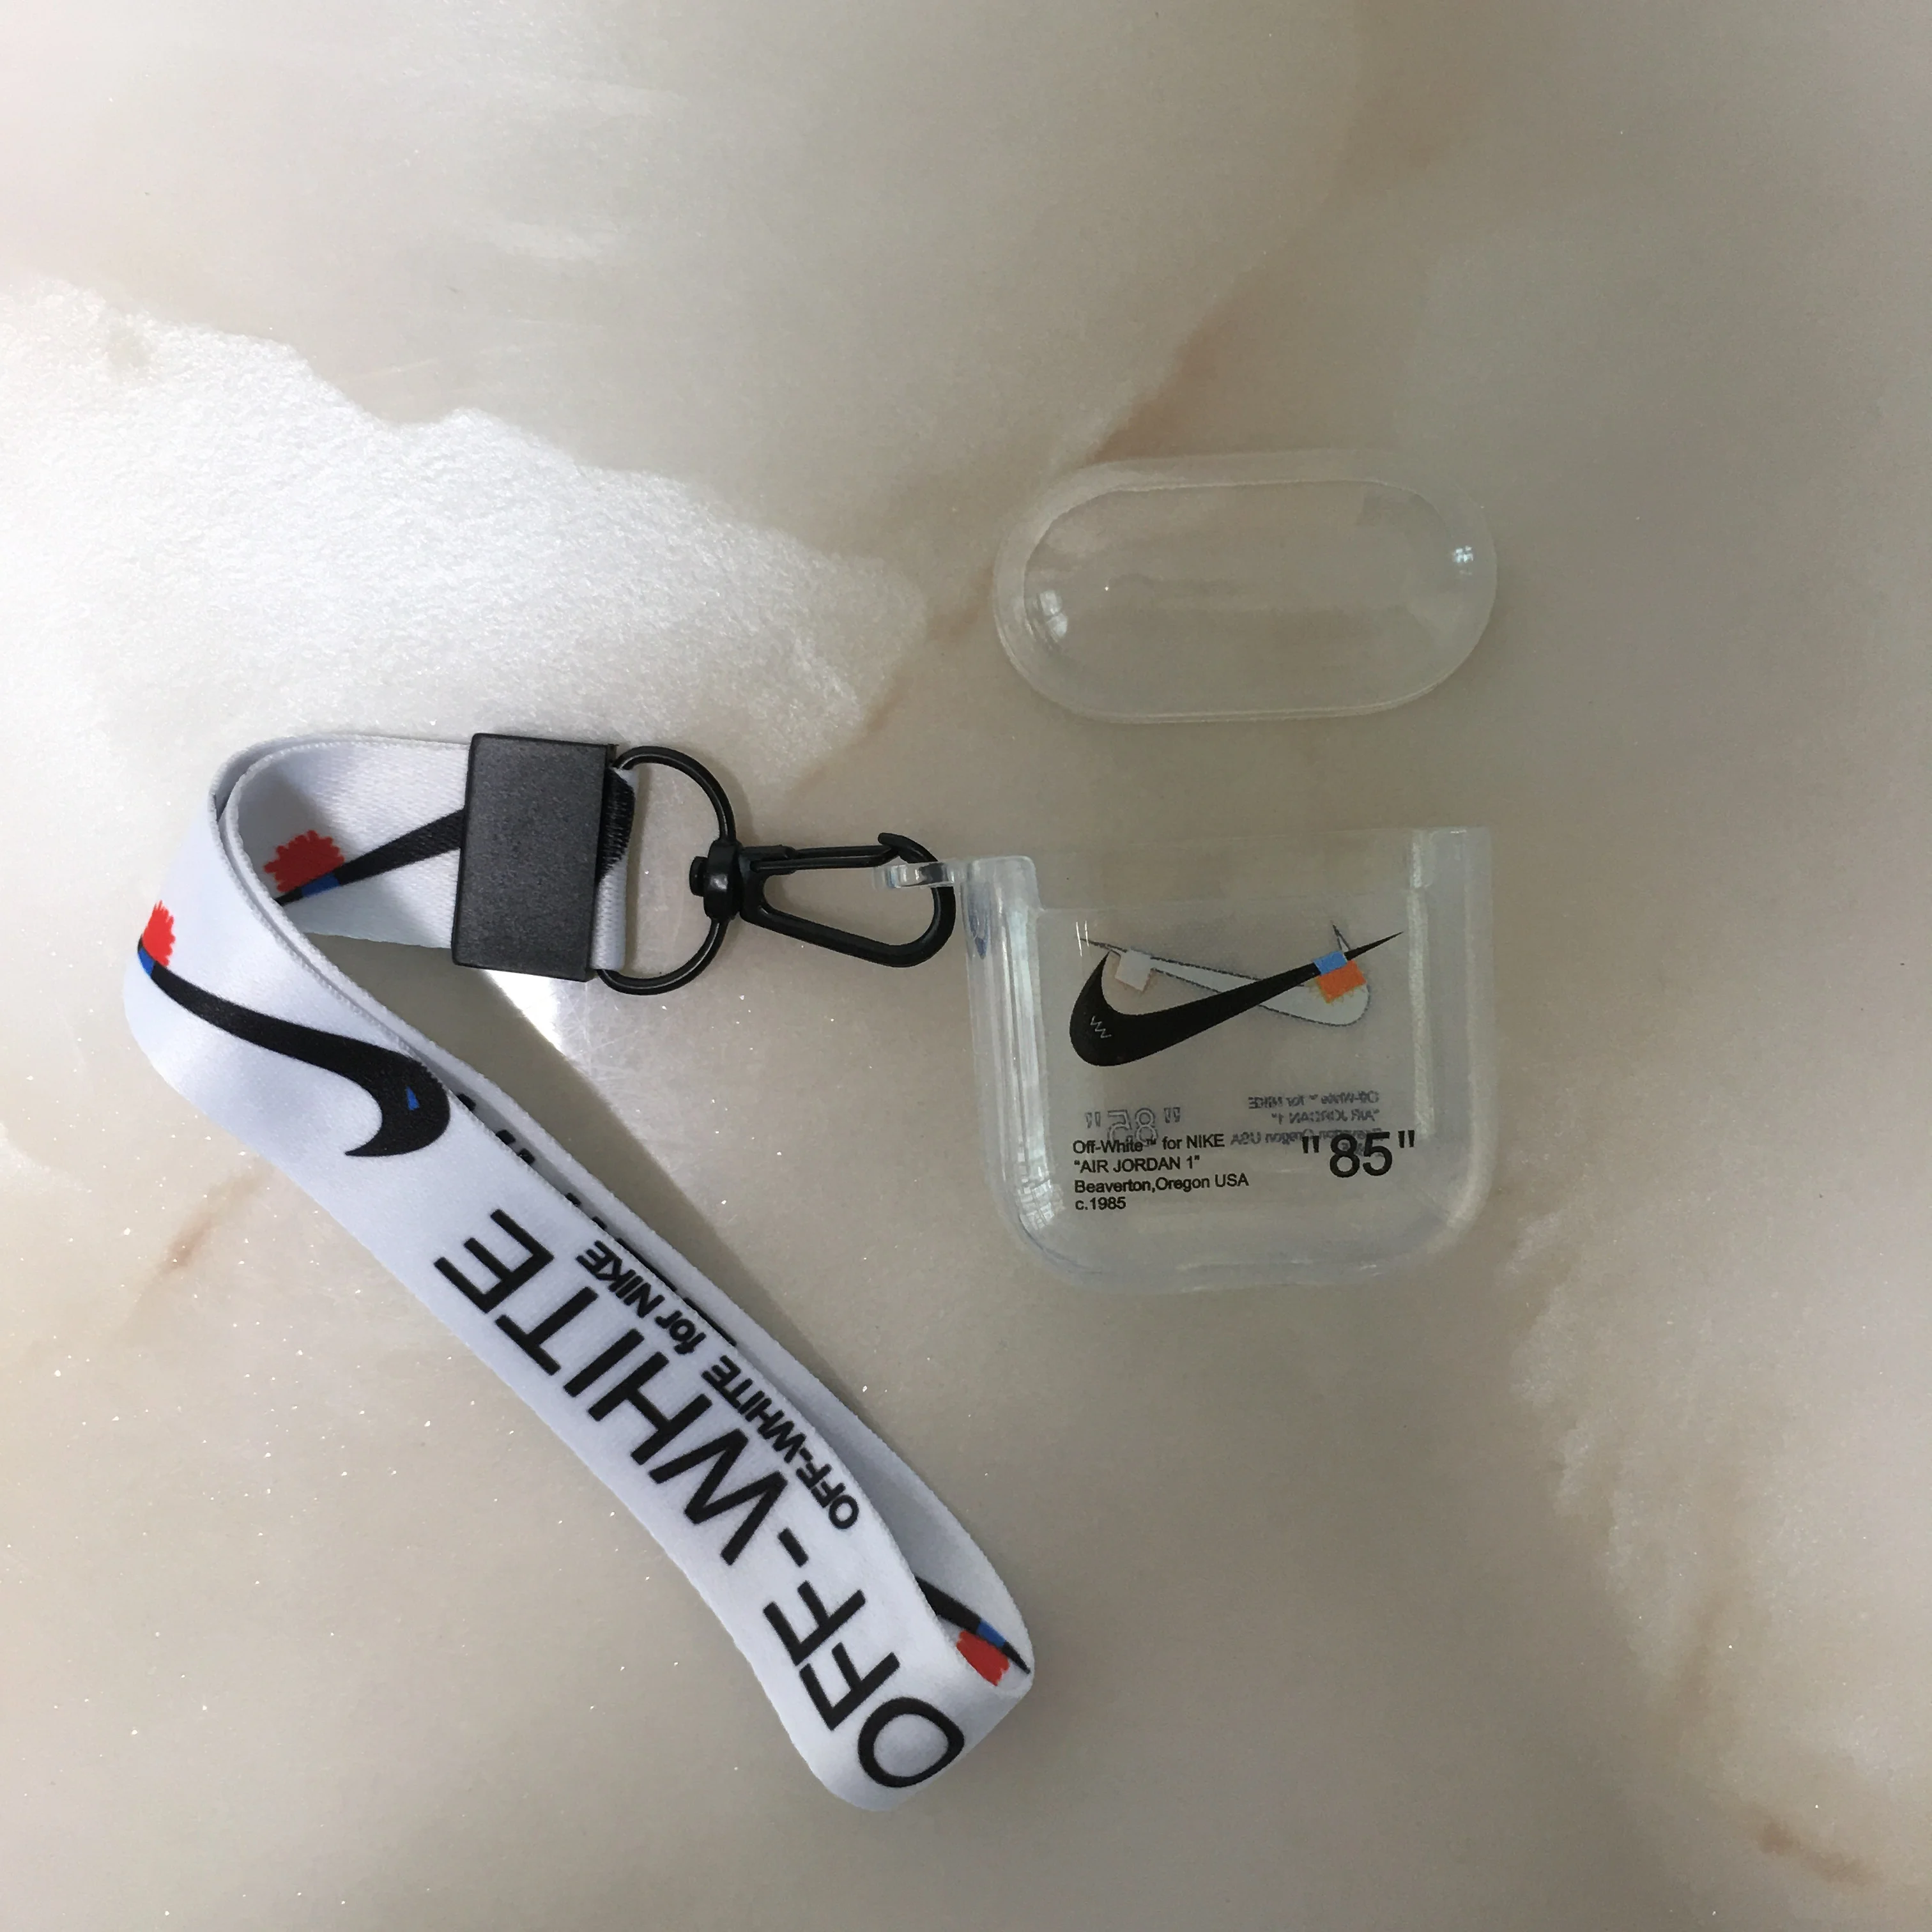 Airpods Pro Hülle Nike Off White - クリア 郵便屋さん おとこ airpods ケース nike - c